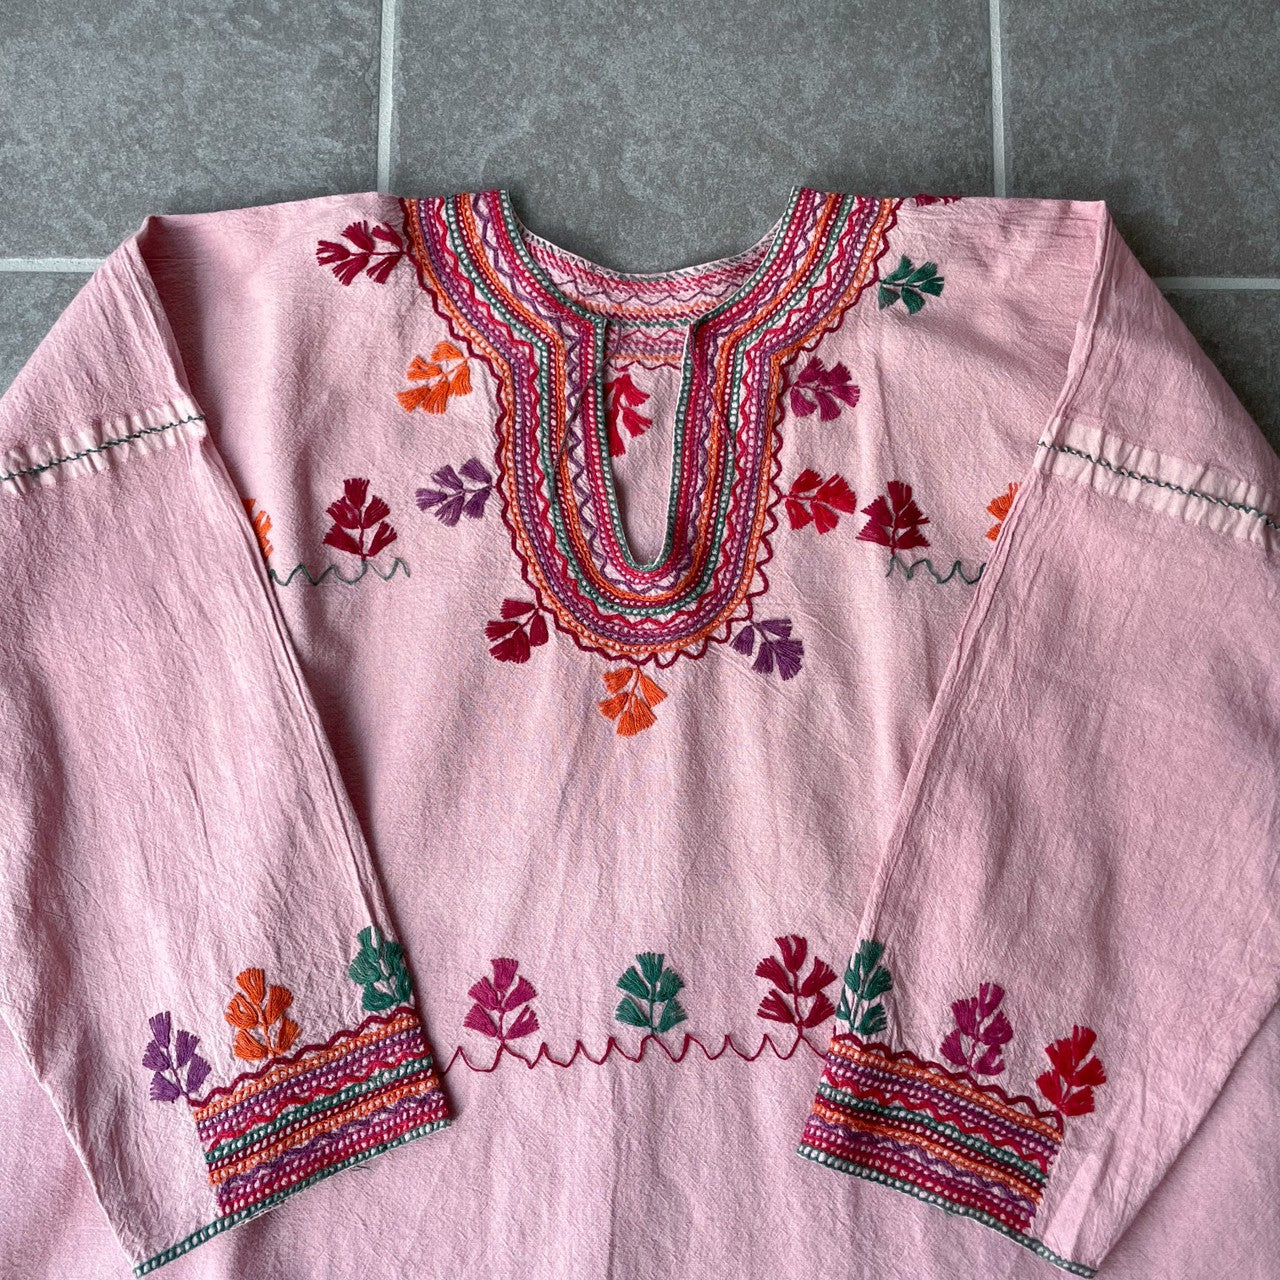 Mexican Embroidery Blouse #1／メキシコ 刺繍 ブラウス トップス 後染め